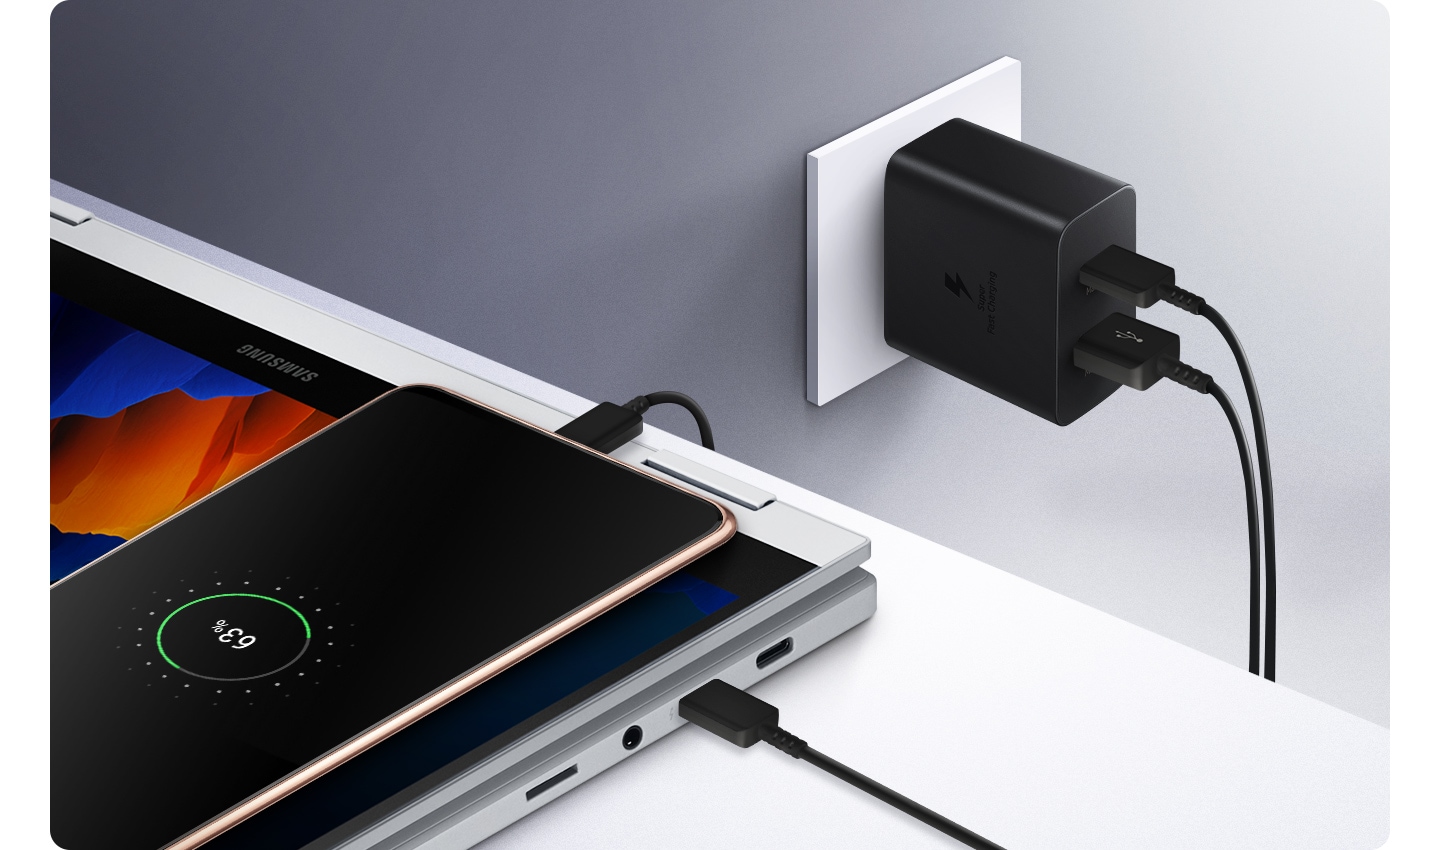 The Power Adapter Duo is plugged into the wall outlet to charge both smartphones and a laptop at the same time.